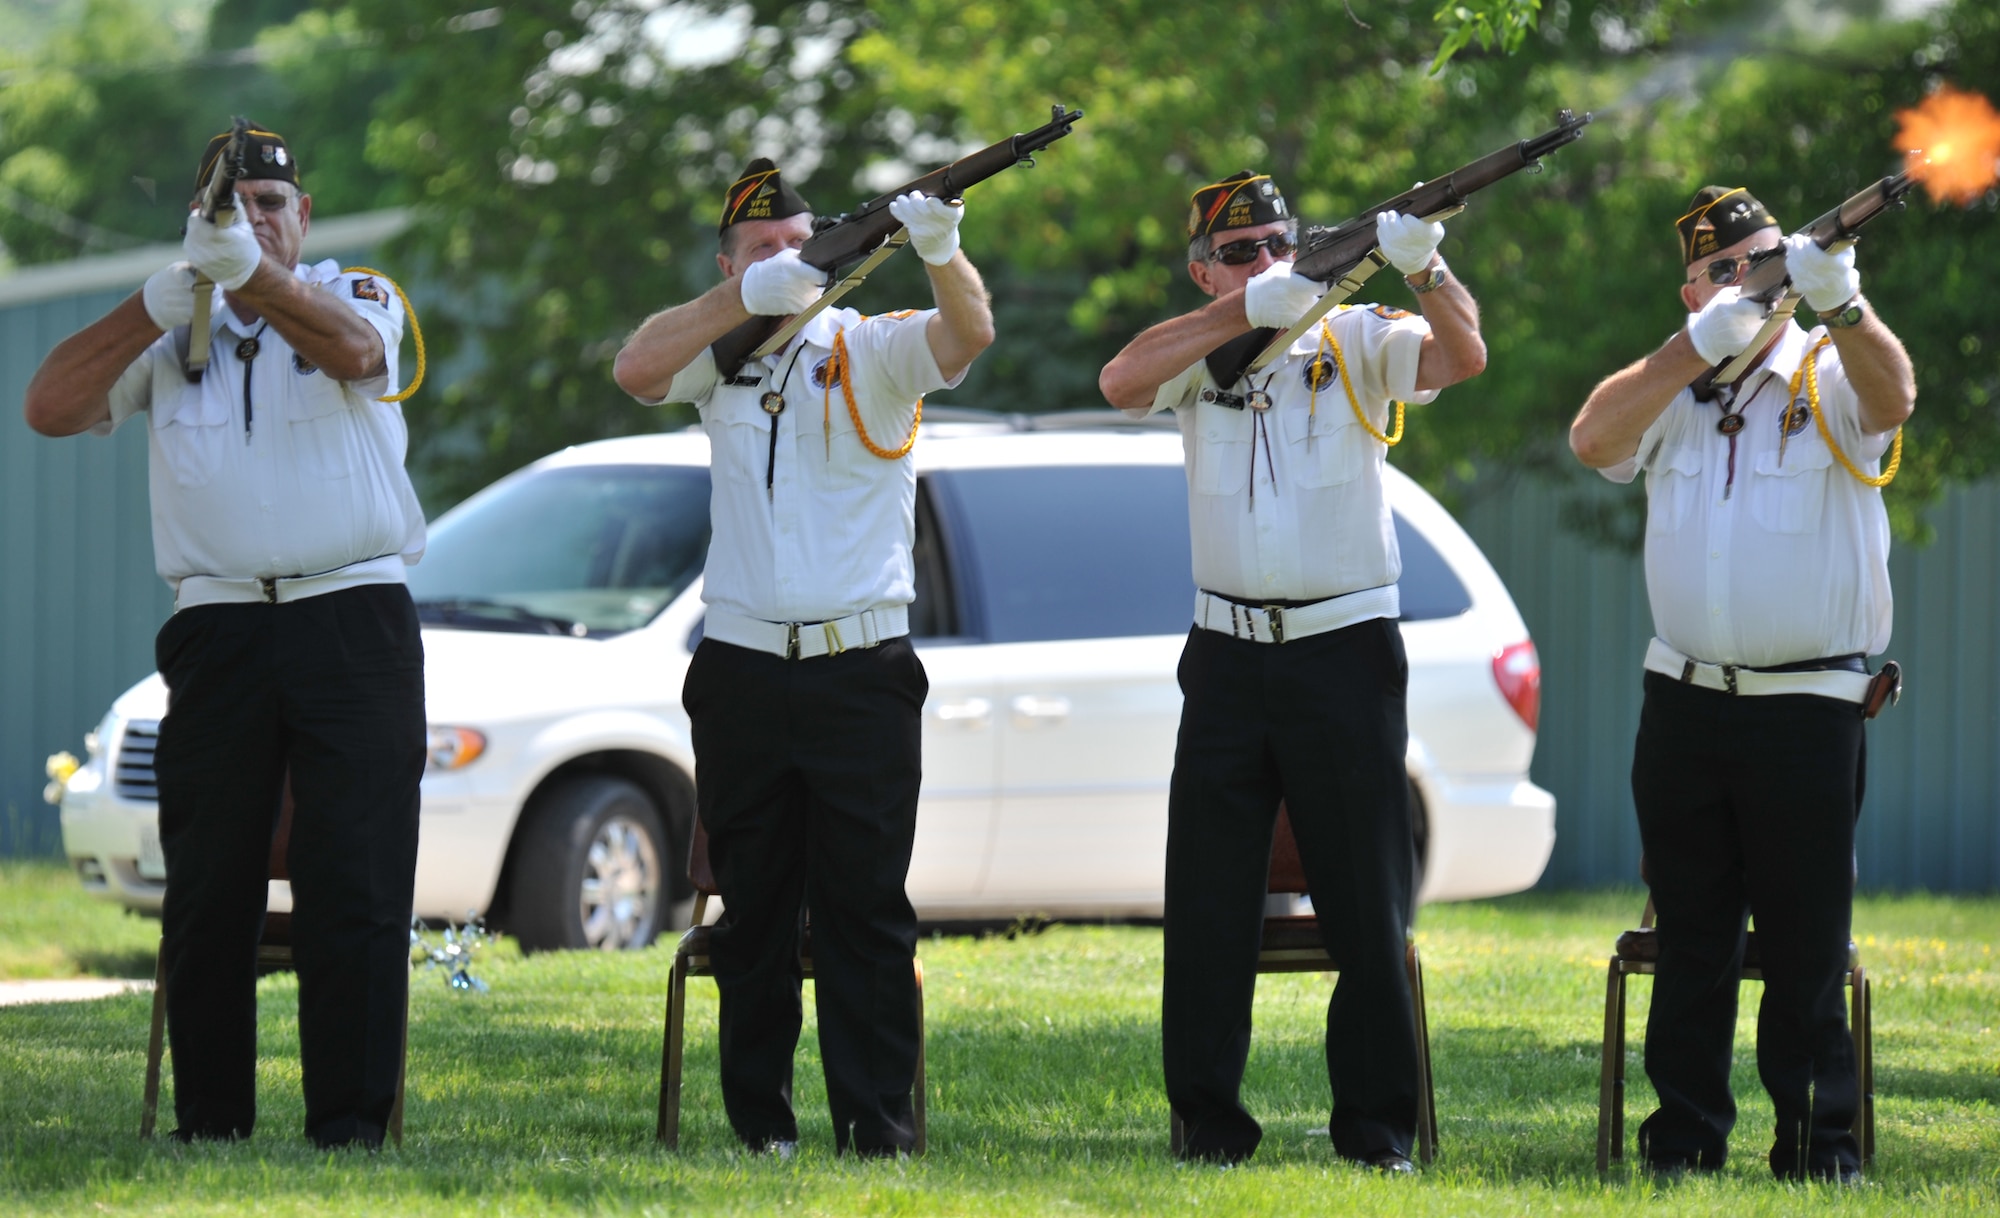 Members of the local Veterans of Foreign Wars chapter fire a 3-volley rifle salute during the 25th annual wreath-laying ceremony for 2nd Lt. George Whiteman May 18, 2013, in Sedalia, Mo. Whiteman, a Sedalia native, was in the Air Force for less than two years when he became one of the first Airmen to die during World War II. (U.S. Air Force photo by Senior Airman Brigitte N. Brantley/Released)